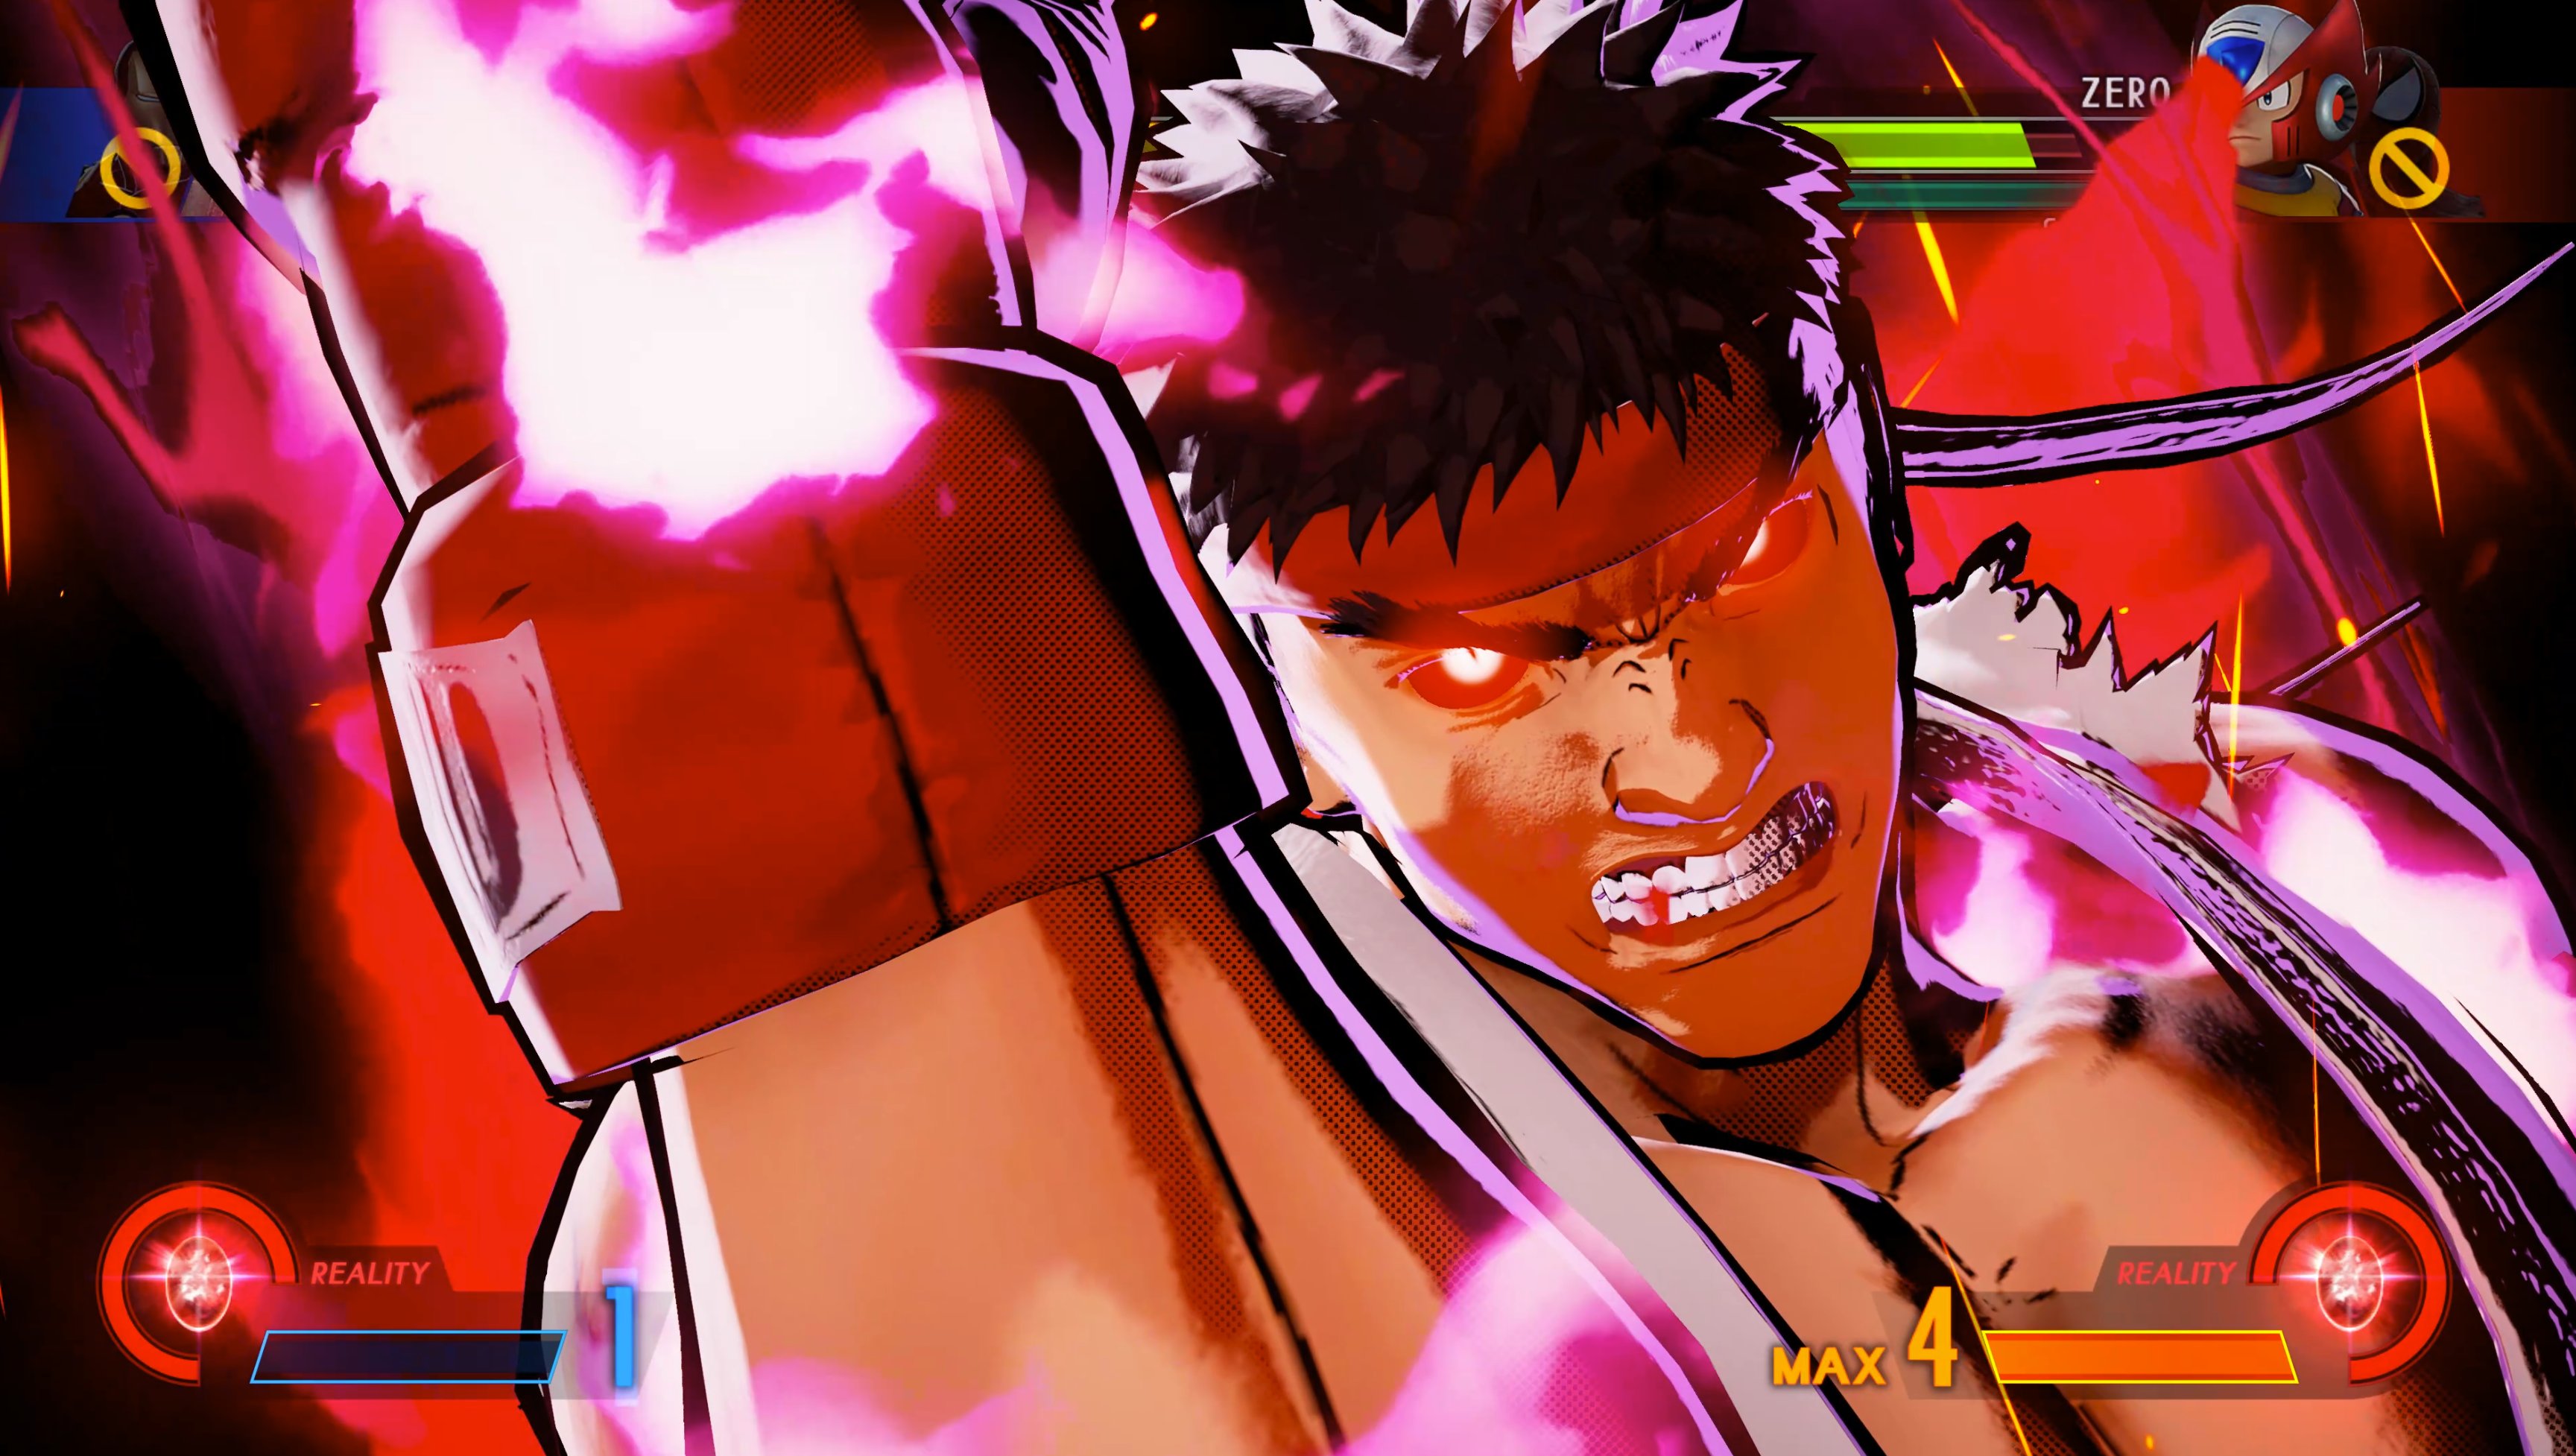 An image of a modded Ryu in MVCI holding up his fist in victorious style.